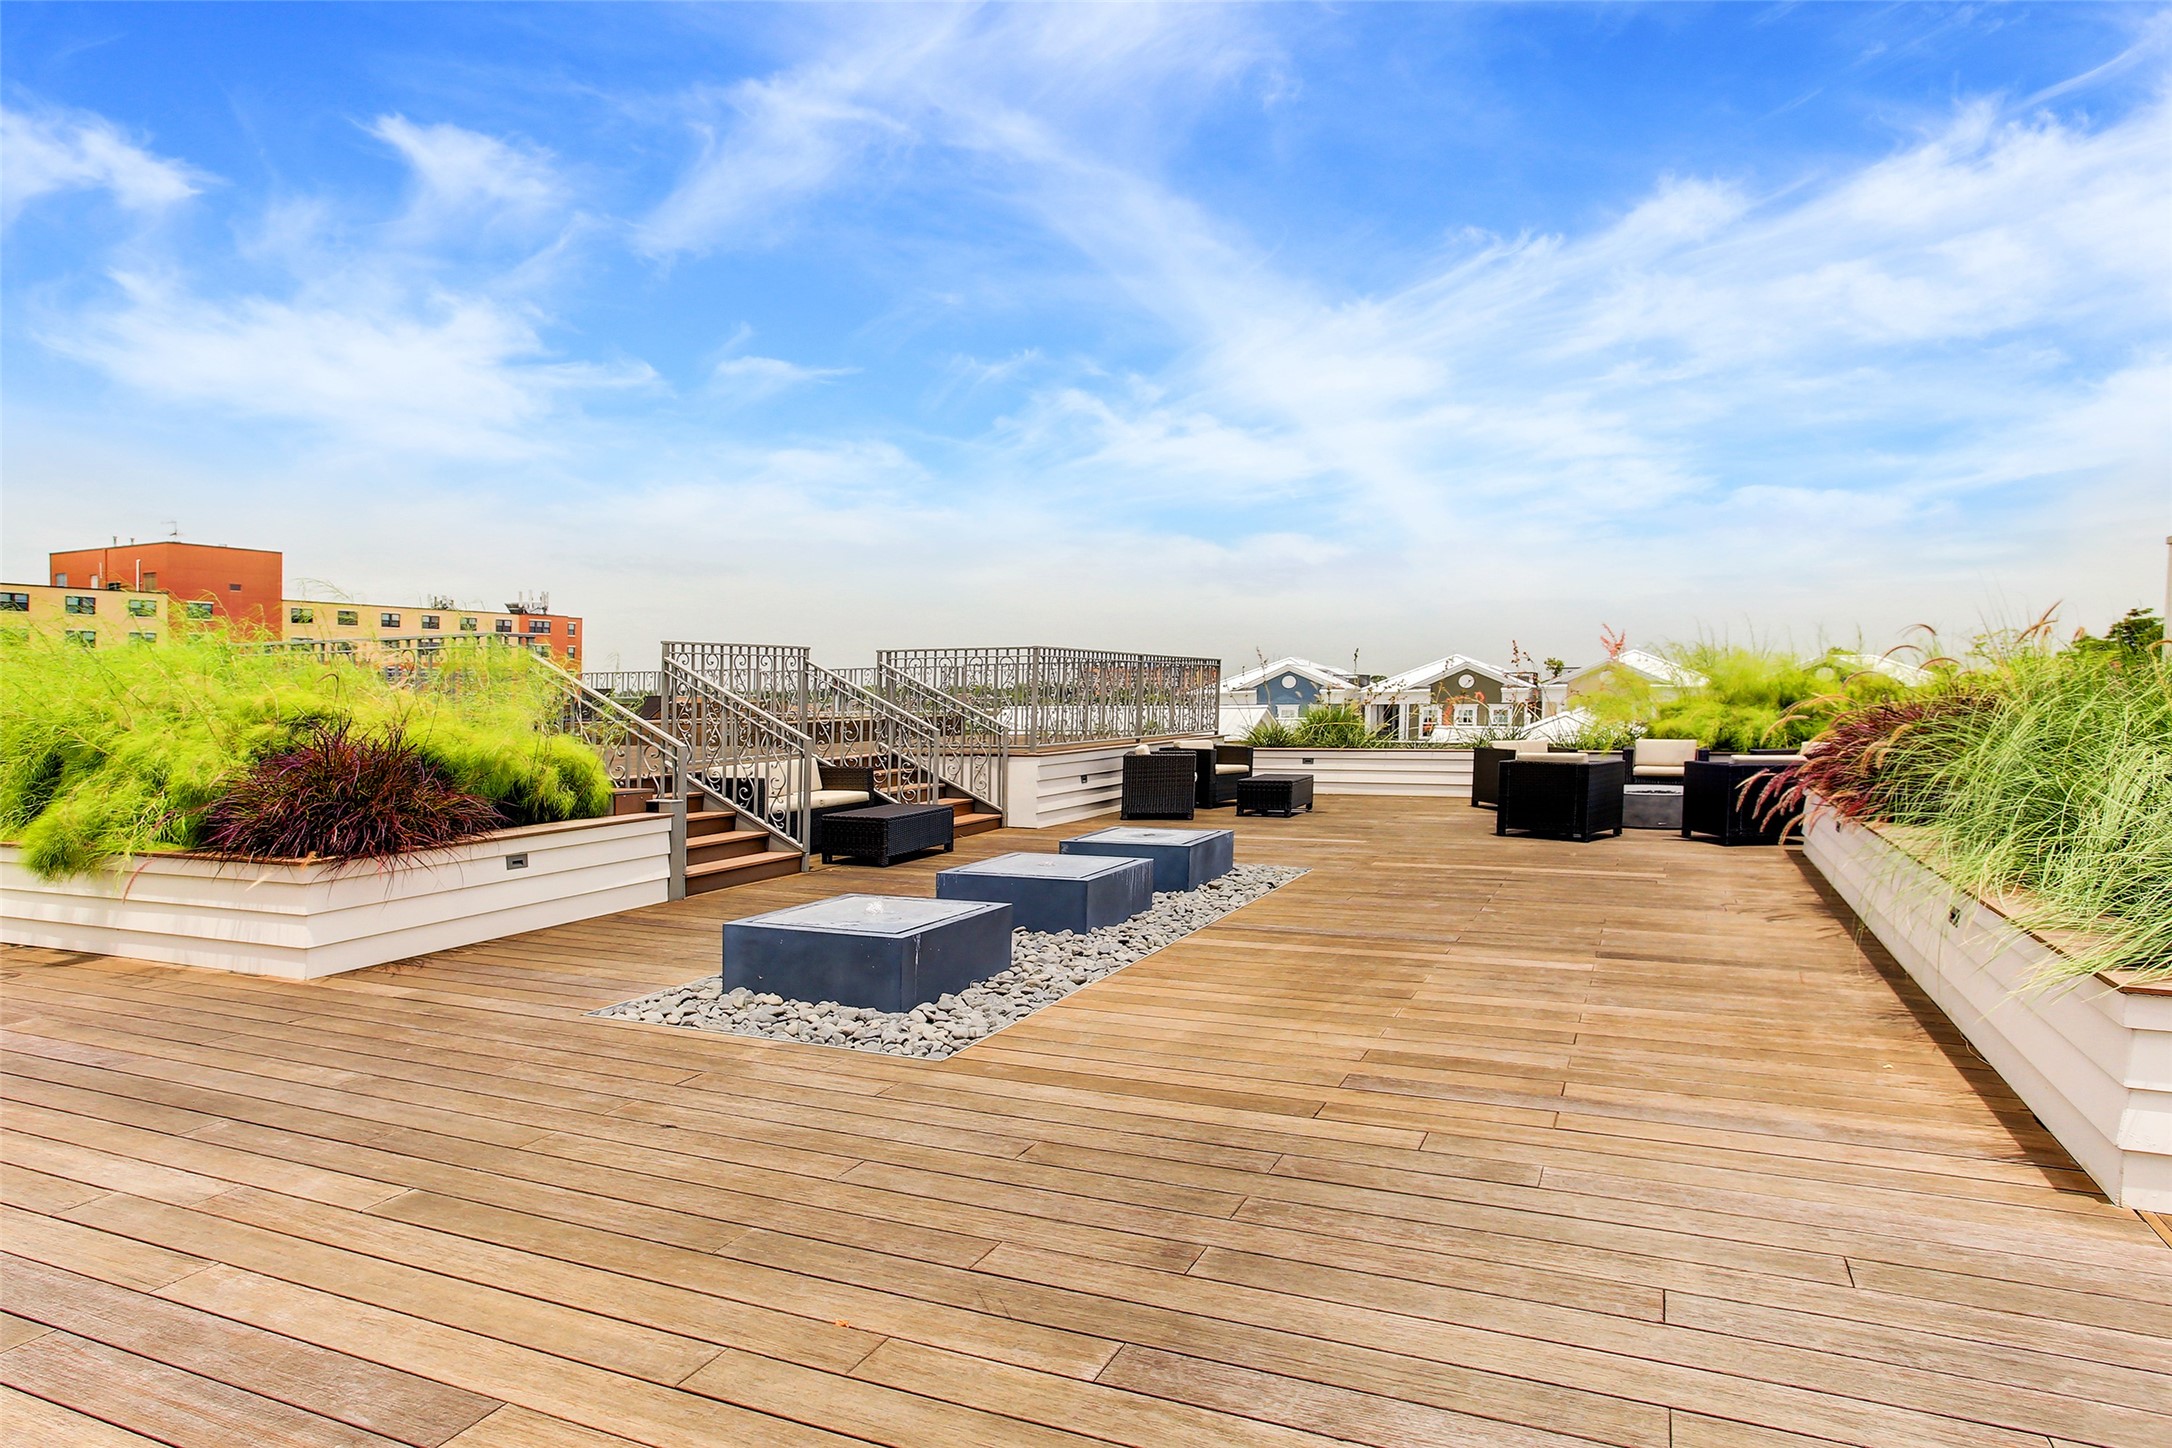 360 views, for days!! All Owners recently paid a concession for new patio furniture (not pictured) on the rooftop terrace.